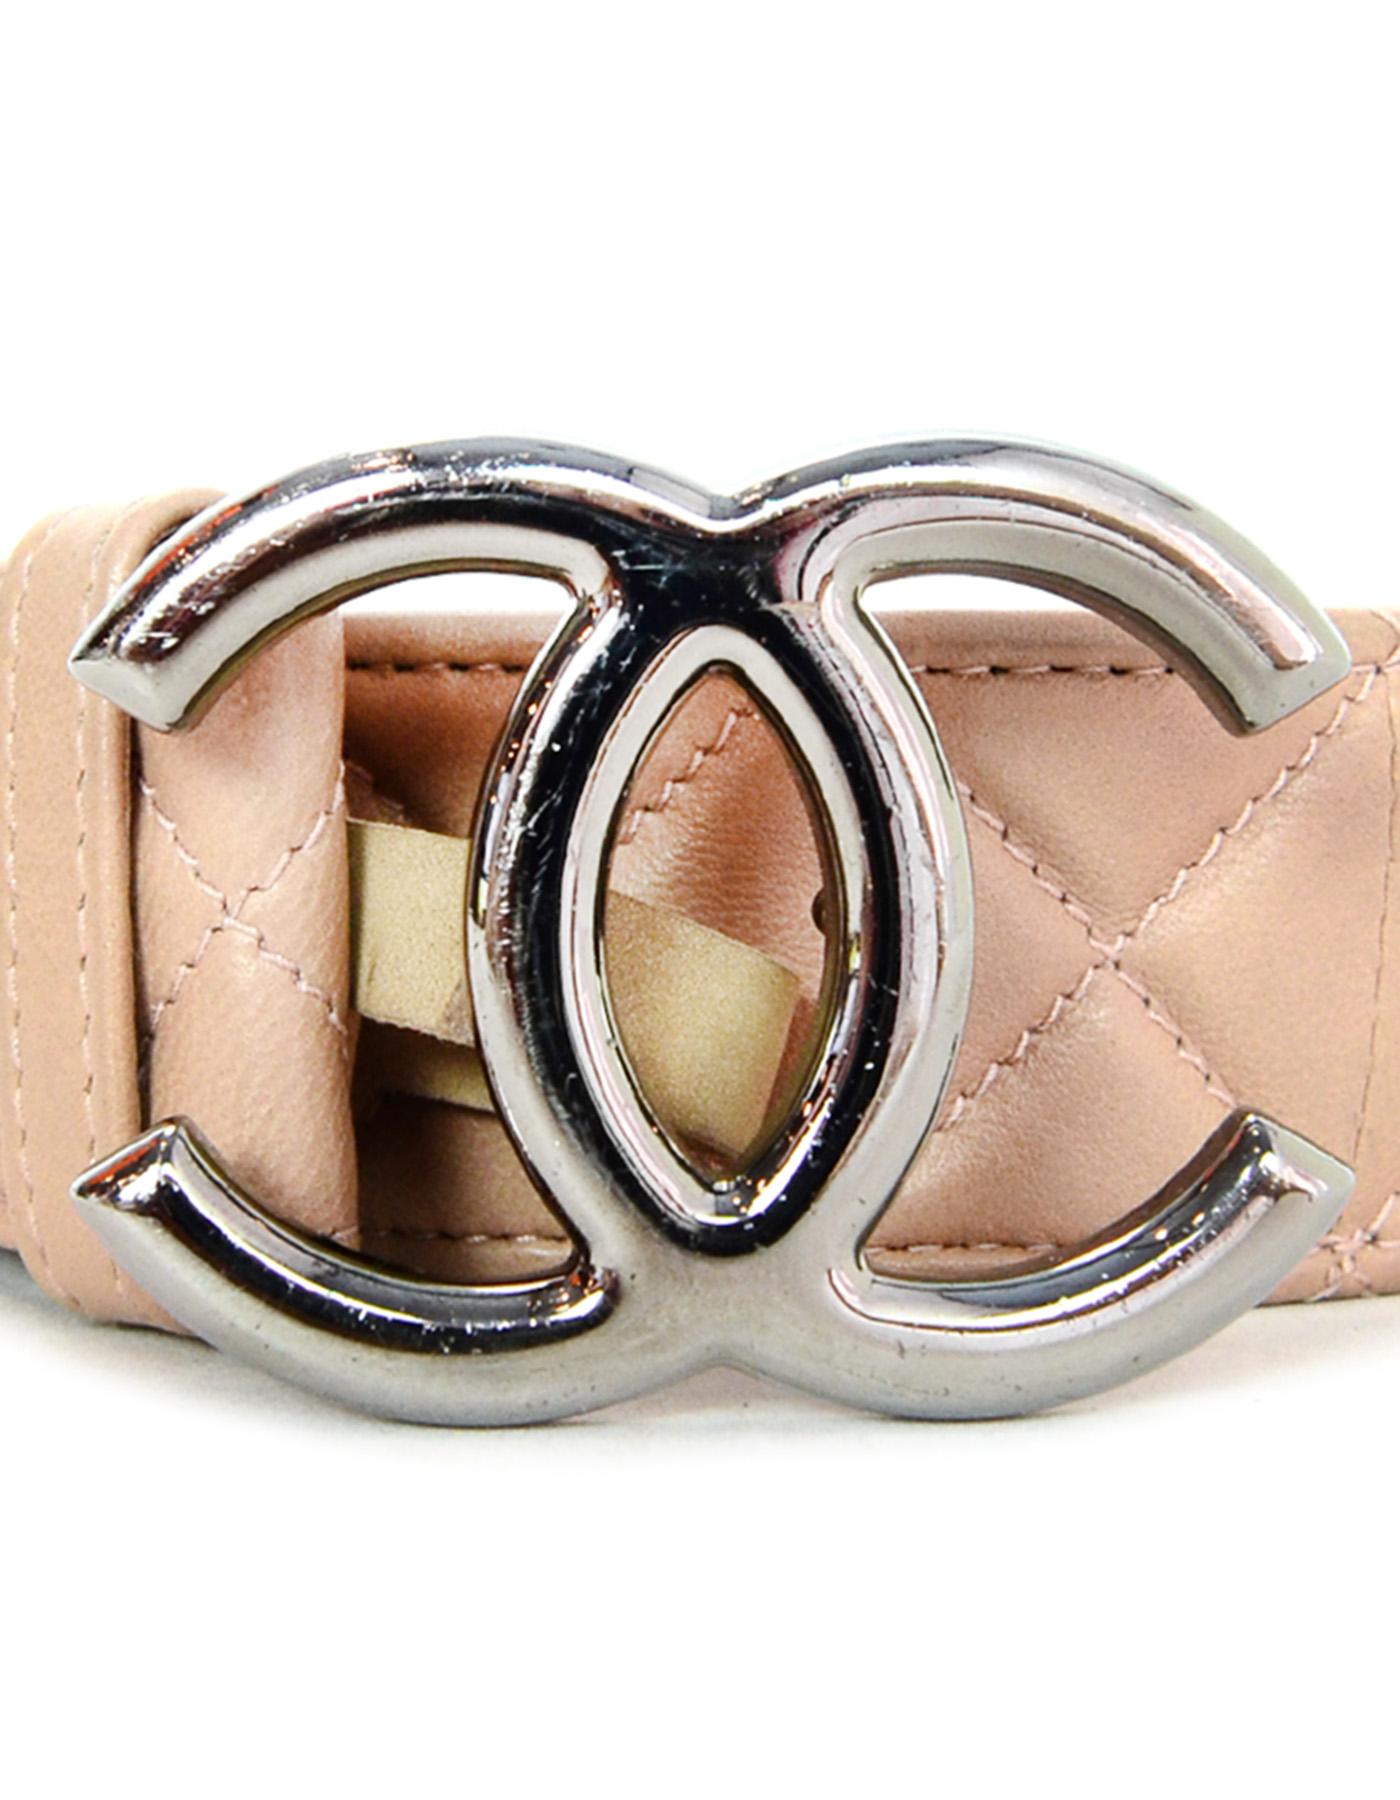 Chanel 2014 Nude Lambskin Leather Quilted Belt w/ Gunmetal CC Buckle

Made In: Italy
Year of Production: 2014
Color: Nude, gunmetal
Materials: Leather, suede, metal
Closure/Opening: Peg closure
Stamp: CHANEL B14 CC P MADE IN ITALY
Overall Condition: